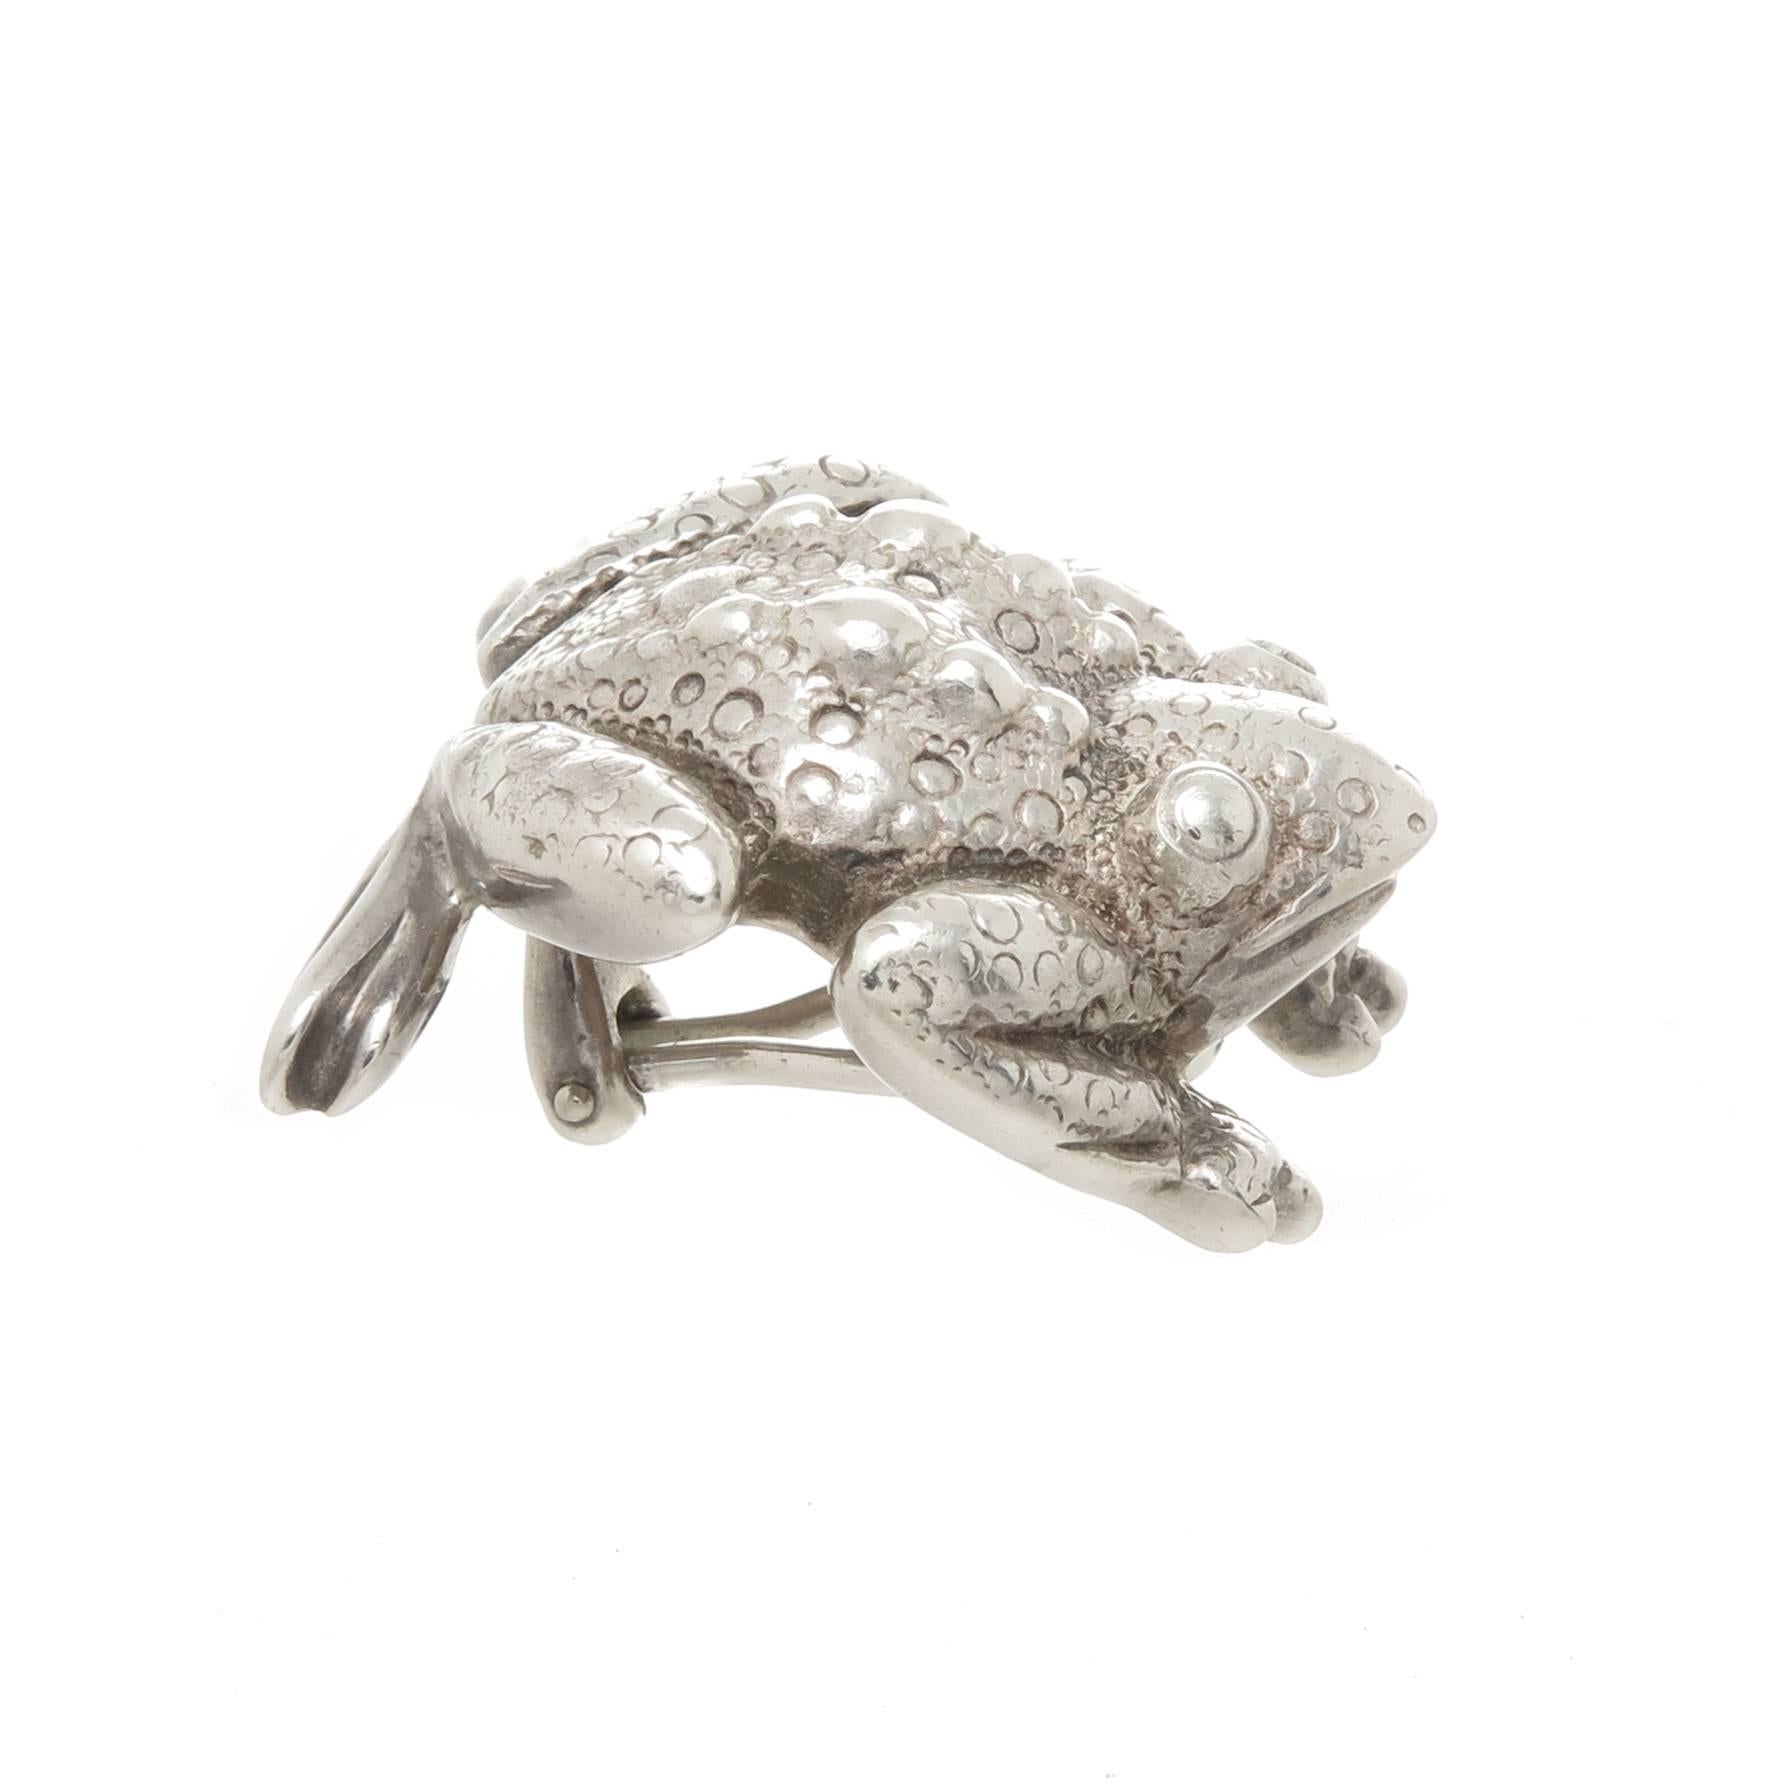 Circa 1980s Tiffany & Company Sterling Silver Bull Frog Earrings, measuring 1 1/8 inch in length X 1 inch. Having great detail, Omega clip backs to which a post can be easily added if desired. Comes with Tiffany felt storage pouch.